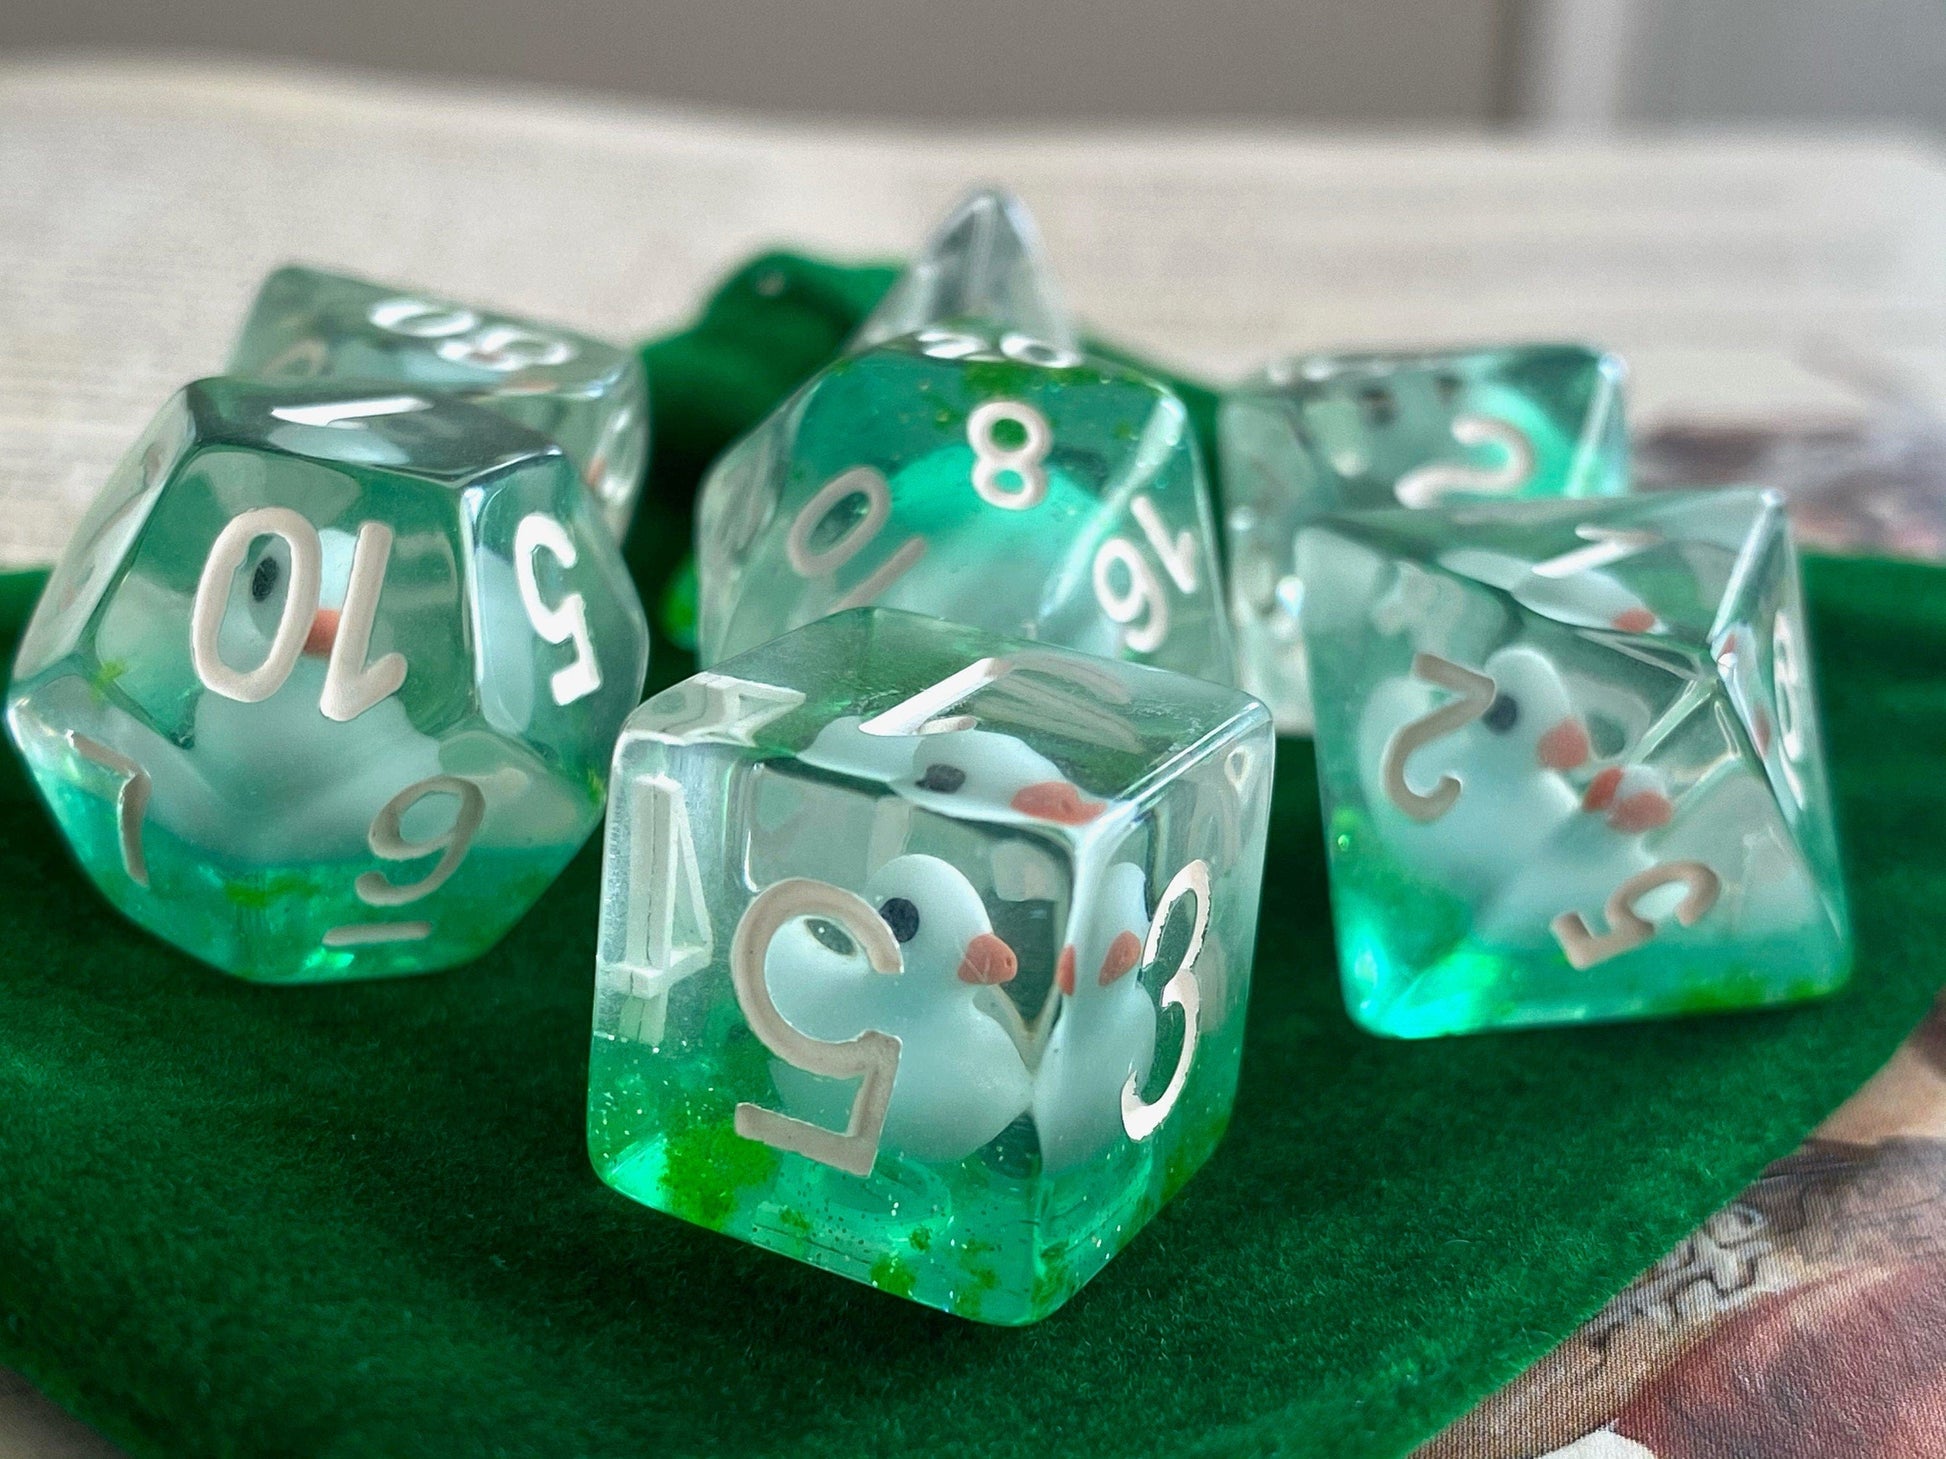 The Crooked Tavern Dice Sets Blue Ducky RPG Polyhedral Dice Set | Little Blue Ducks inside!